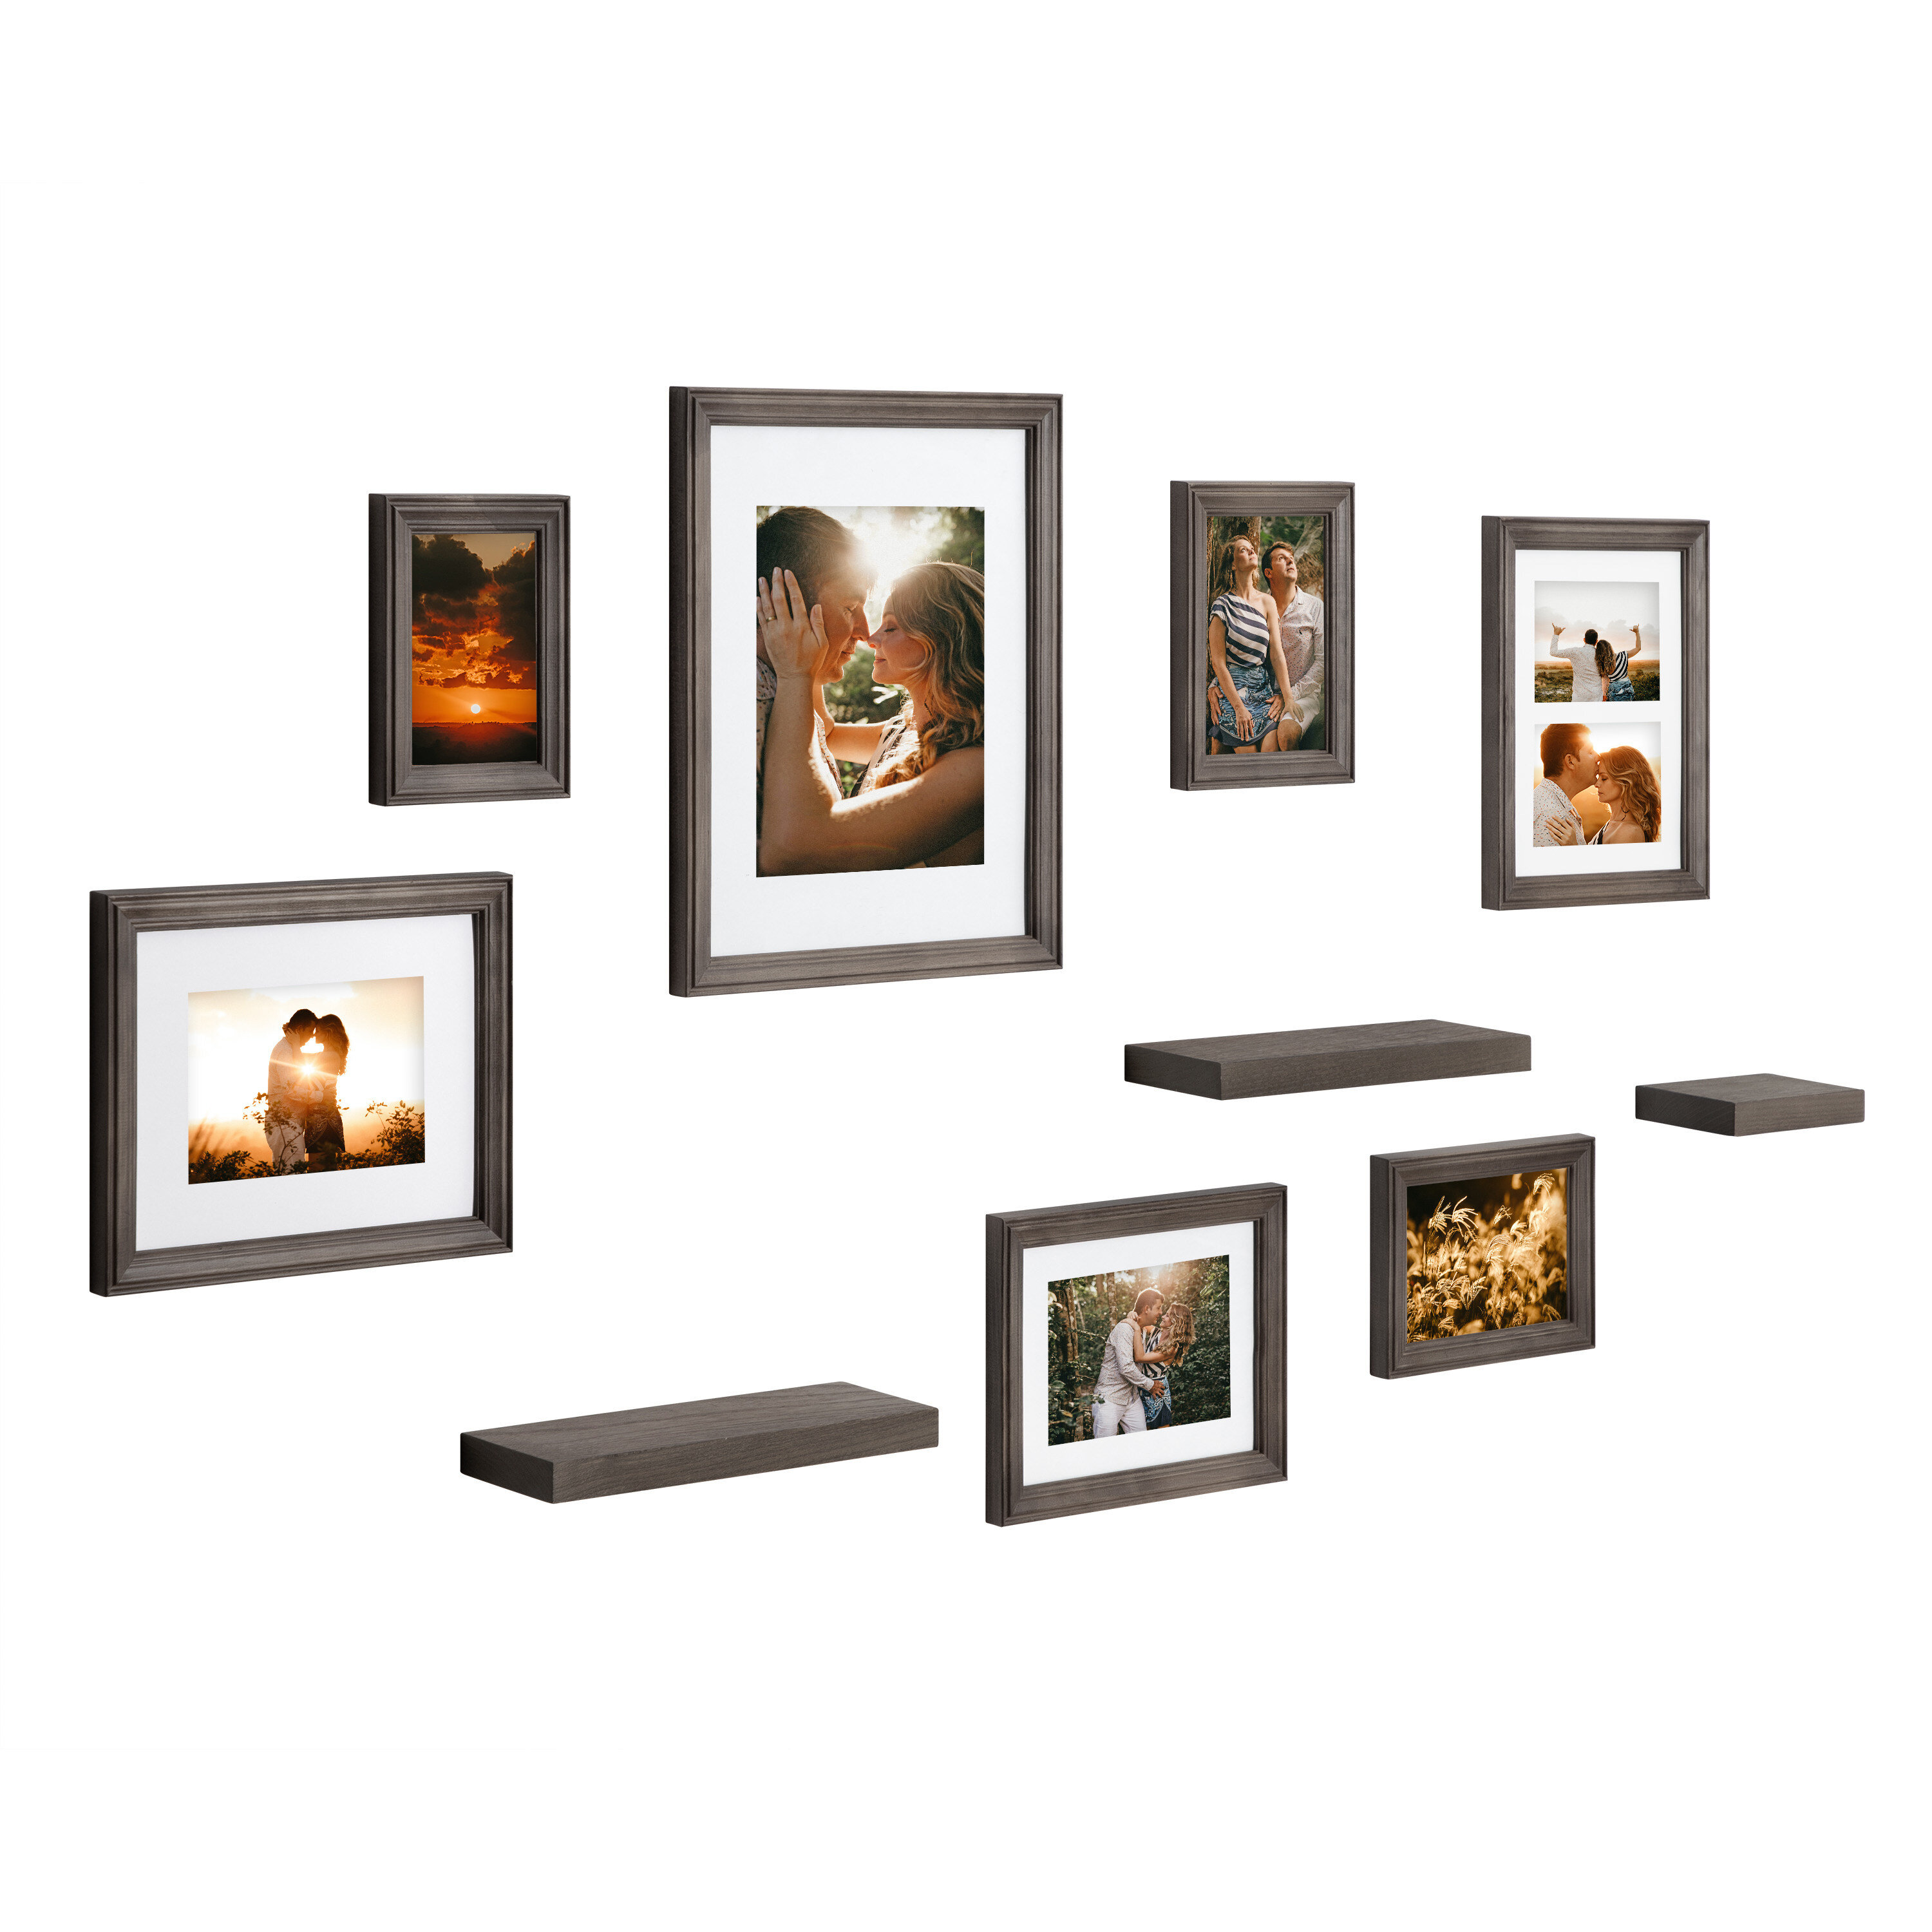 Rolfe 6 Piece 11 x 14 Metal Gallery Wall Set Frame Set in Rose Gold Mercury Row